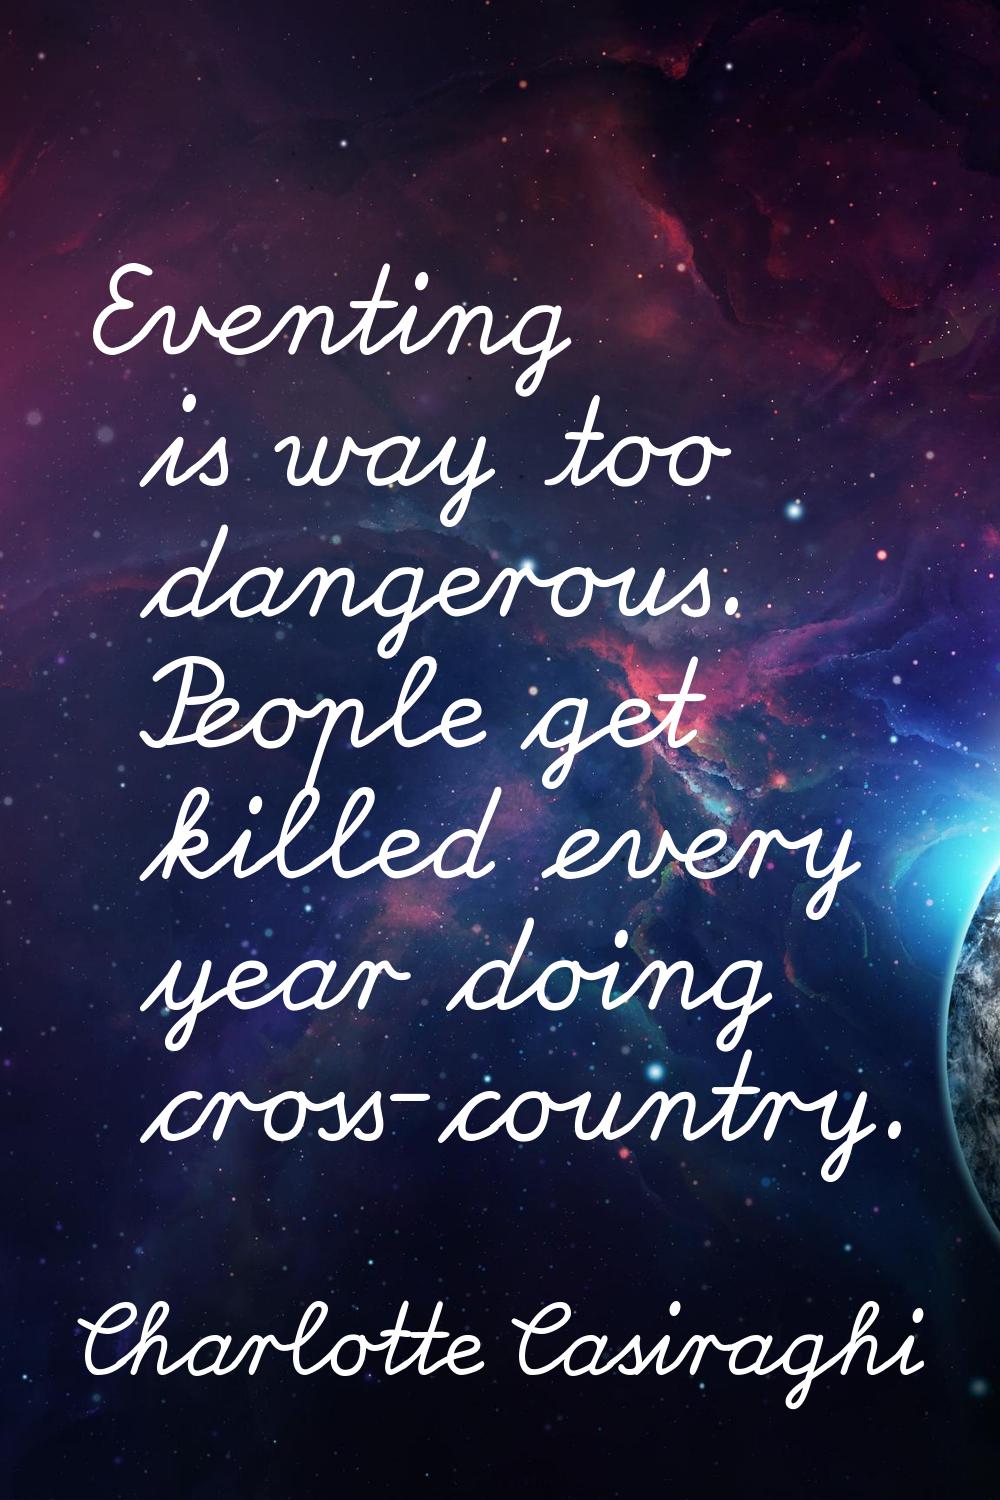 Eventing is way too dangerous. People get killed every year doing cross-country.